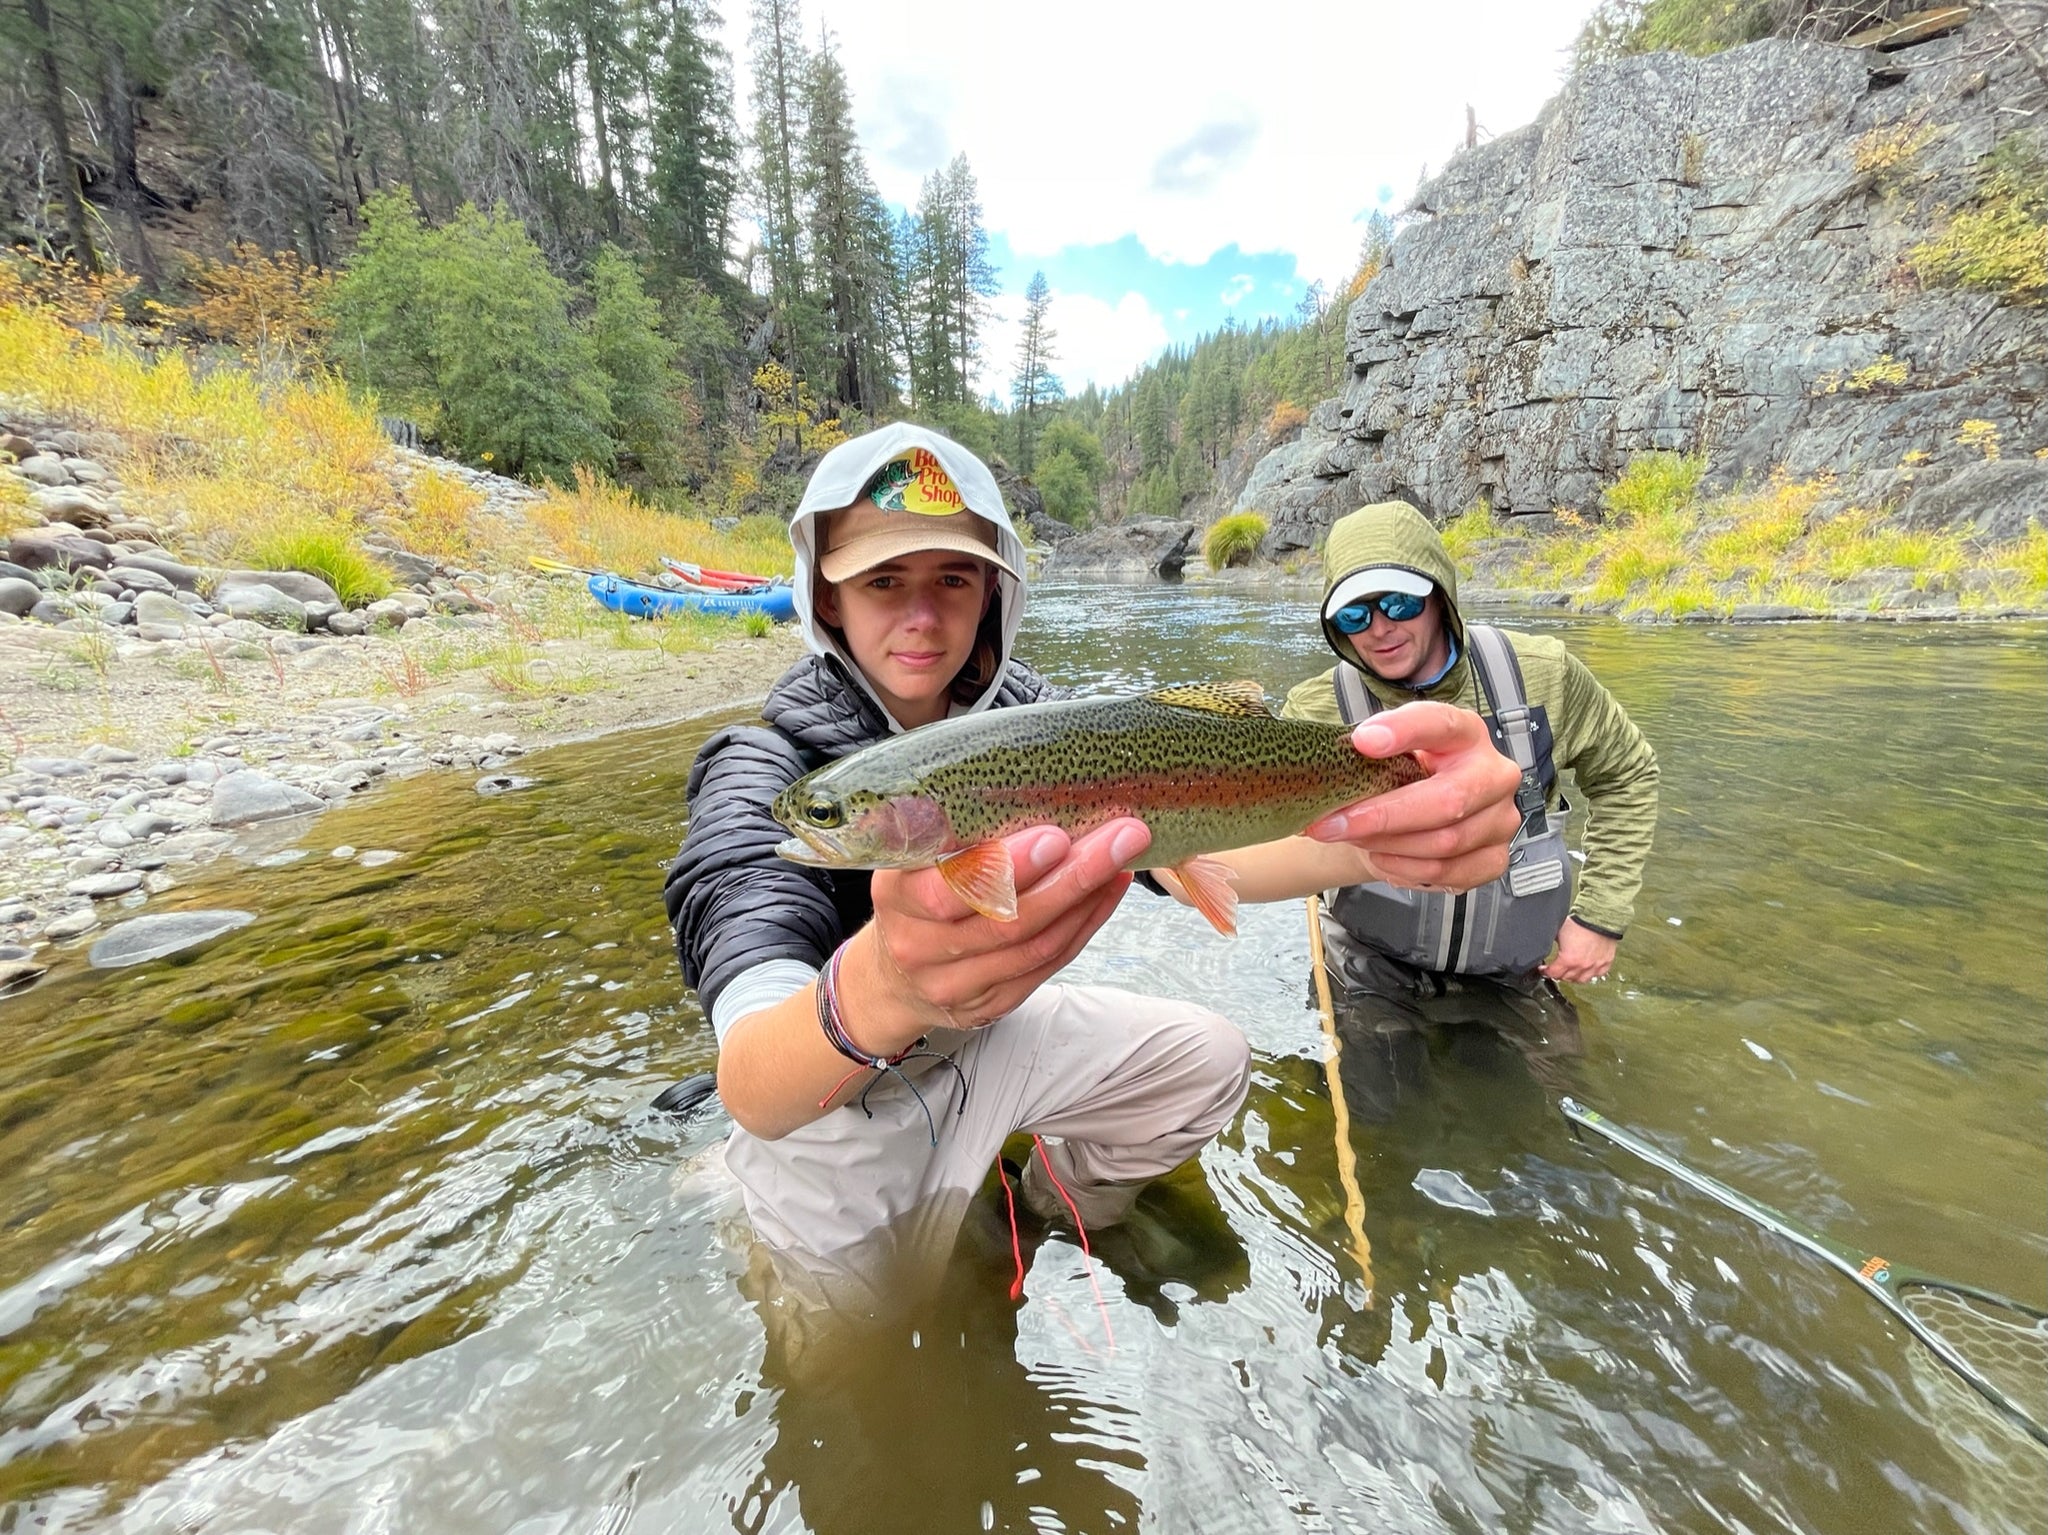 Catching a rainbow trout with a fly rod while on a packrafting trip